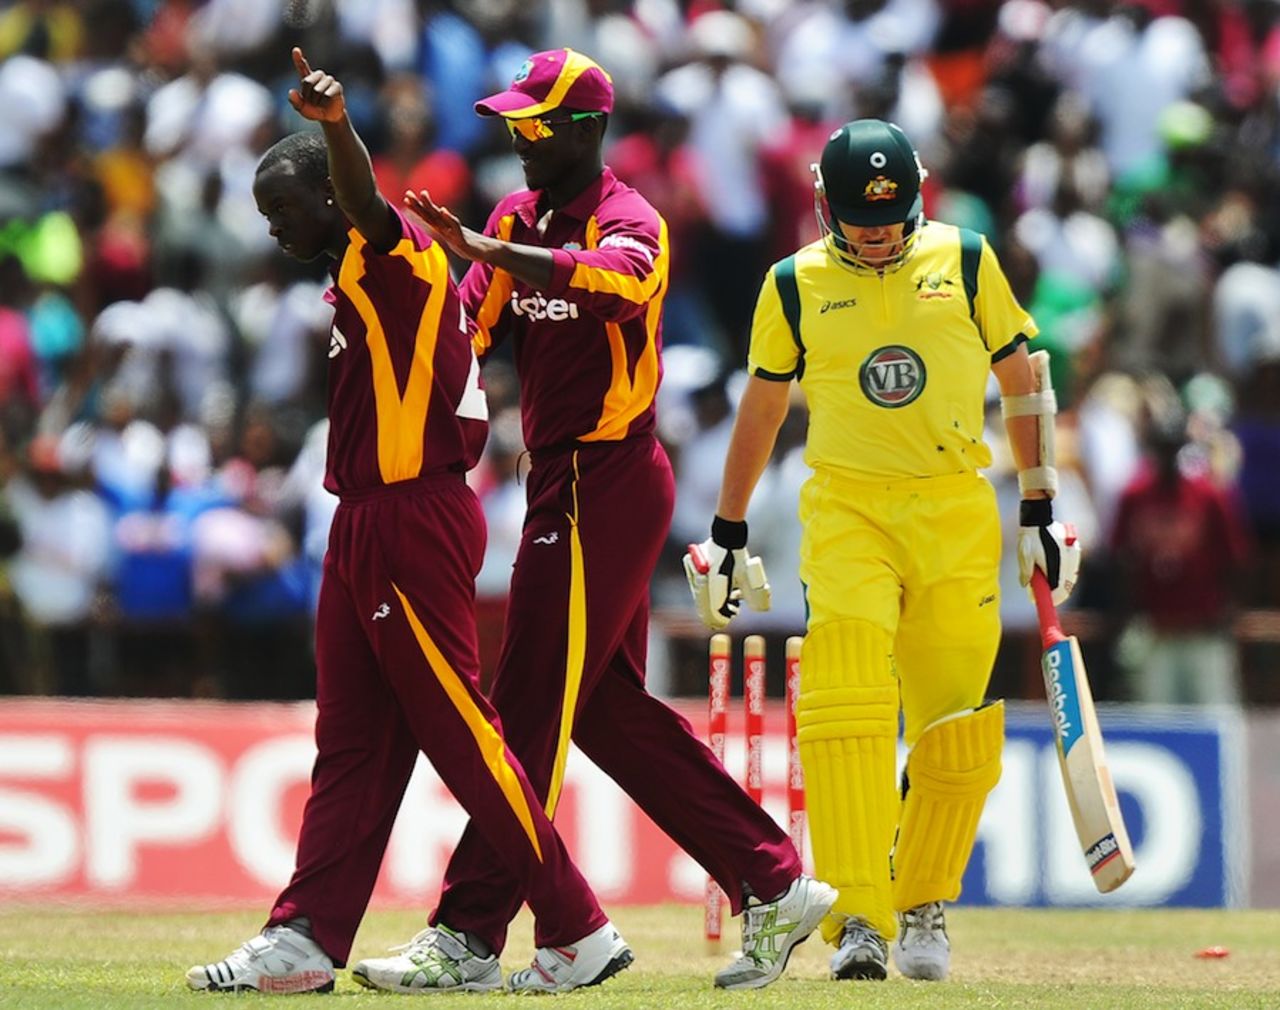 Kemar Roach celebrates a wicket with his captain Darren Sammy, West Indies v Australia, 3rd ODI, St Vincent, March 20, 2012